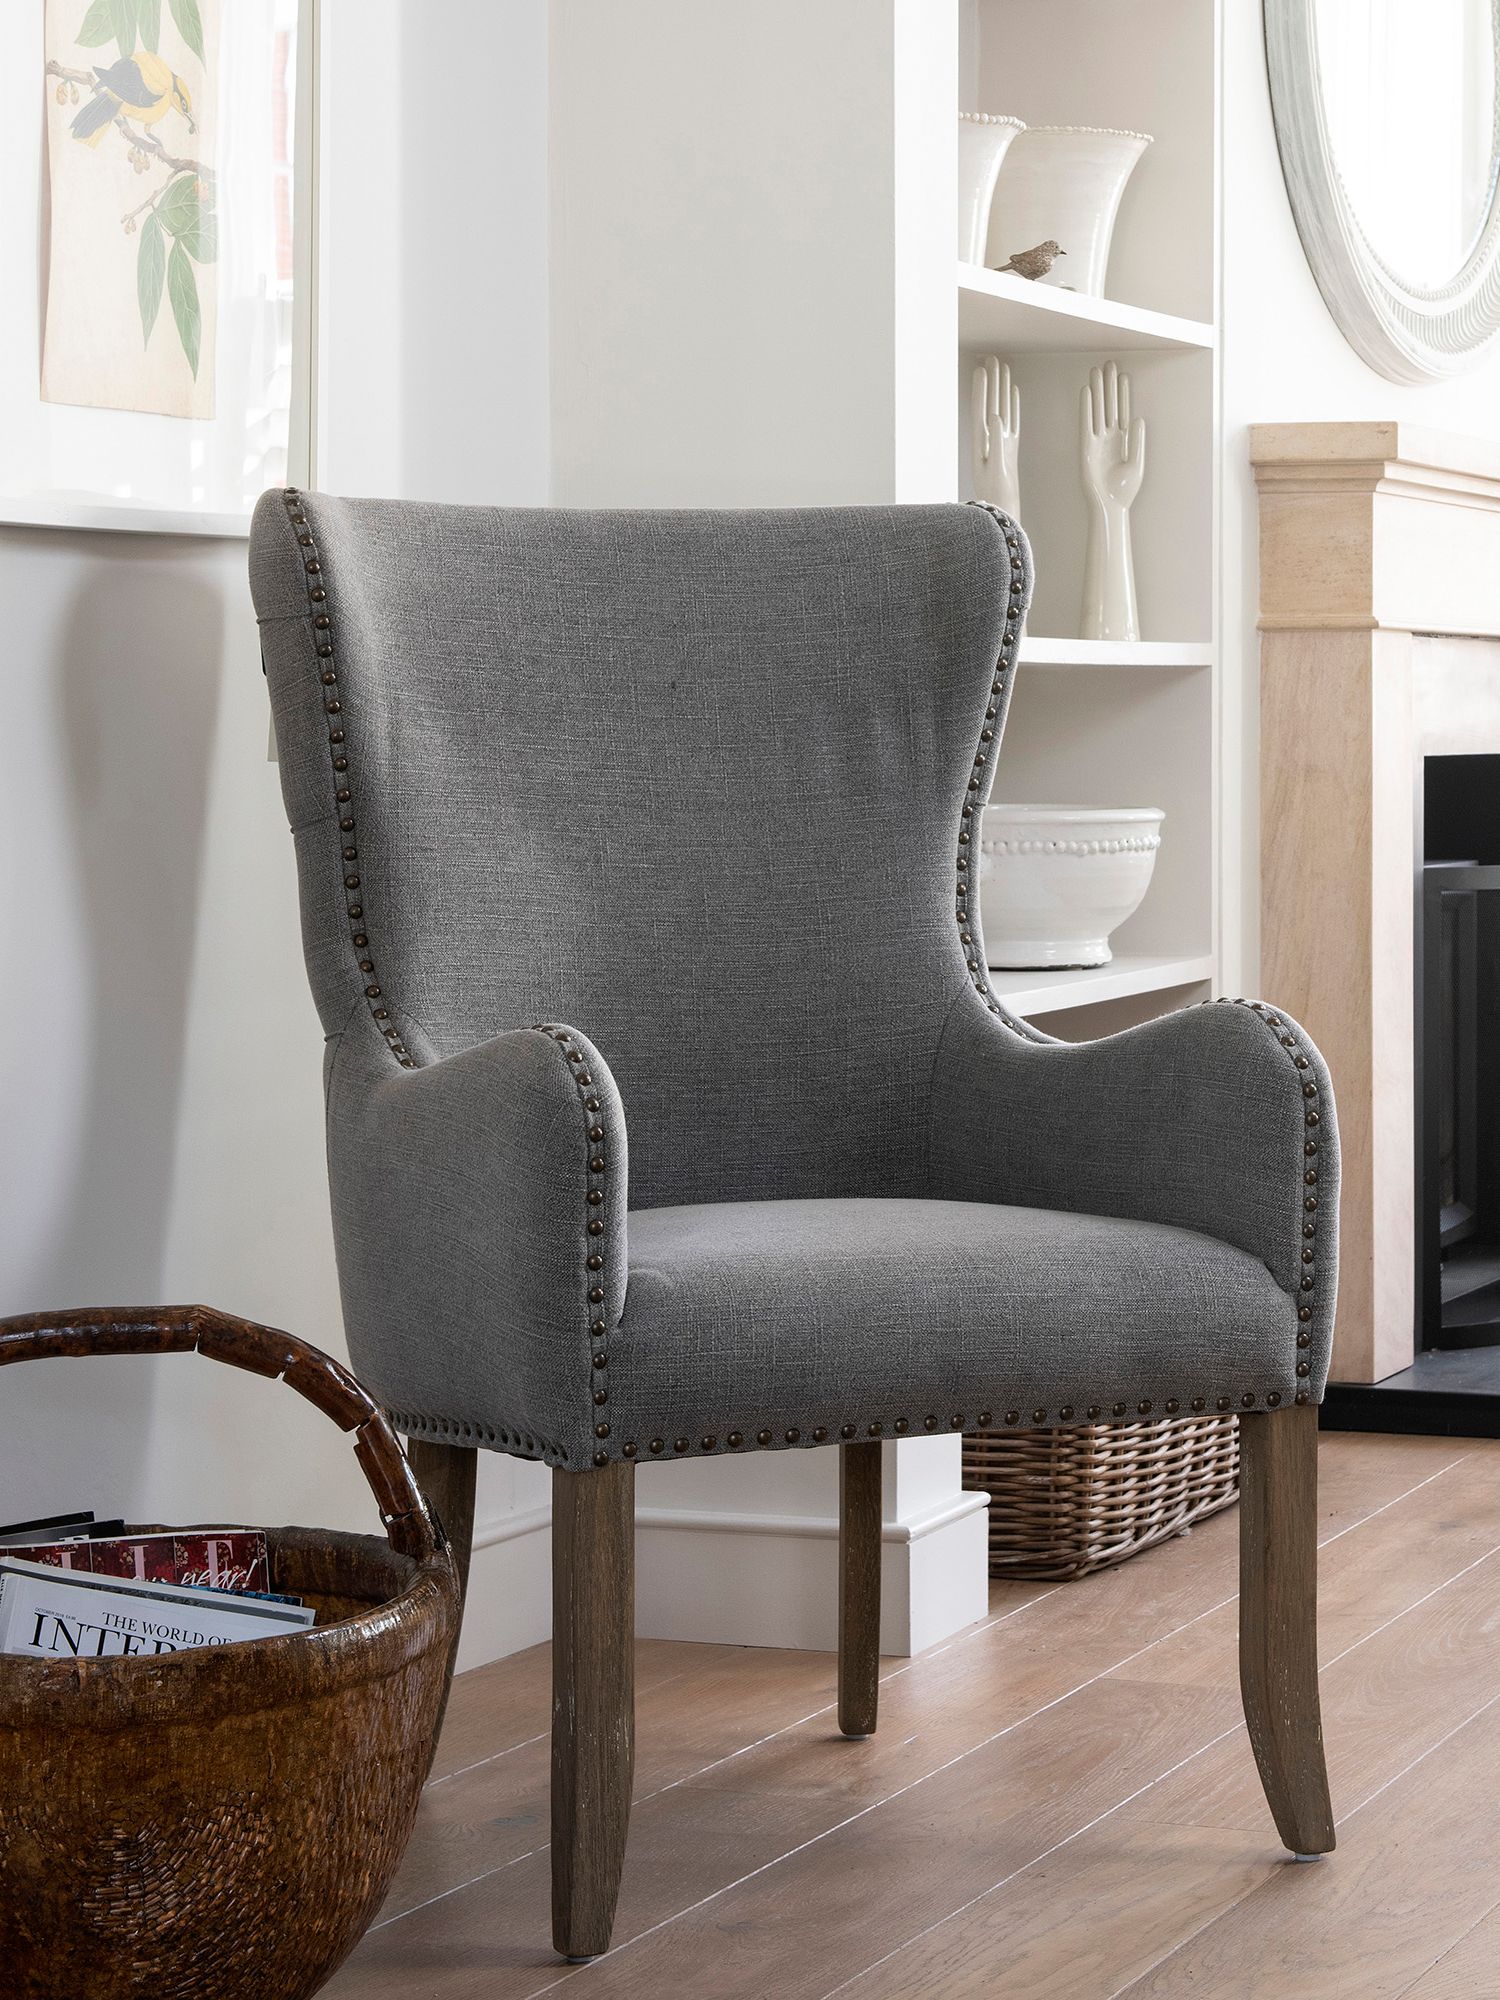 Photo of One.world st james armchair grey